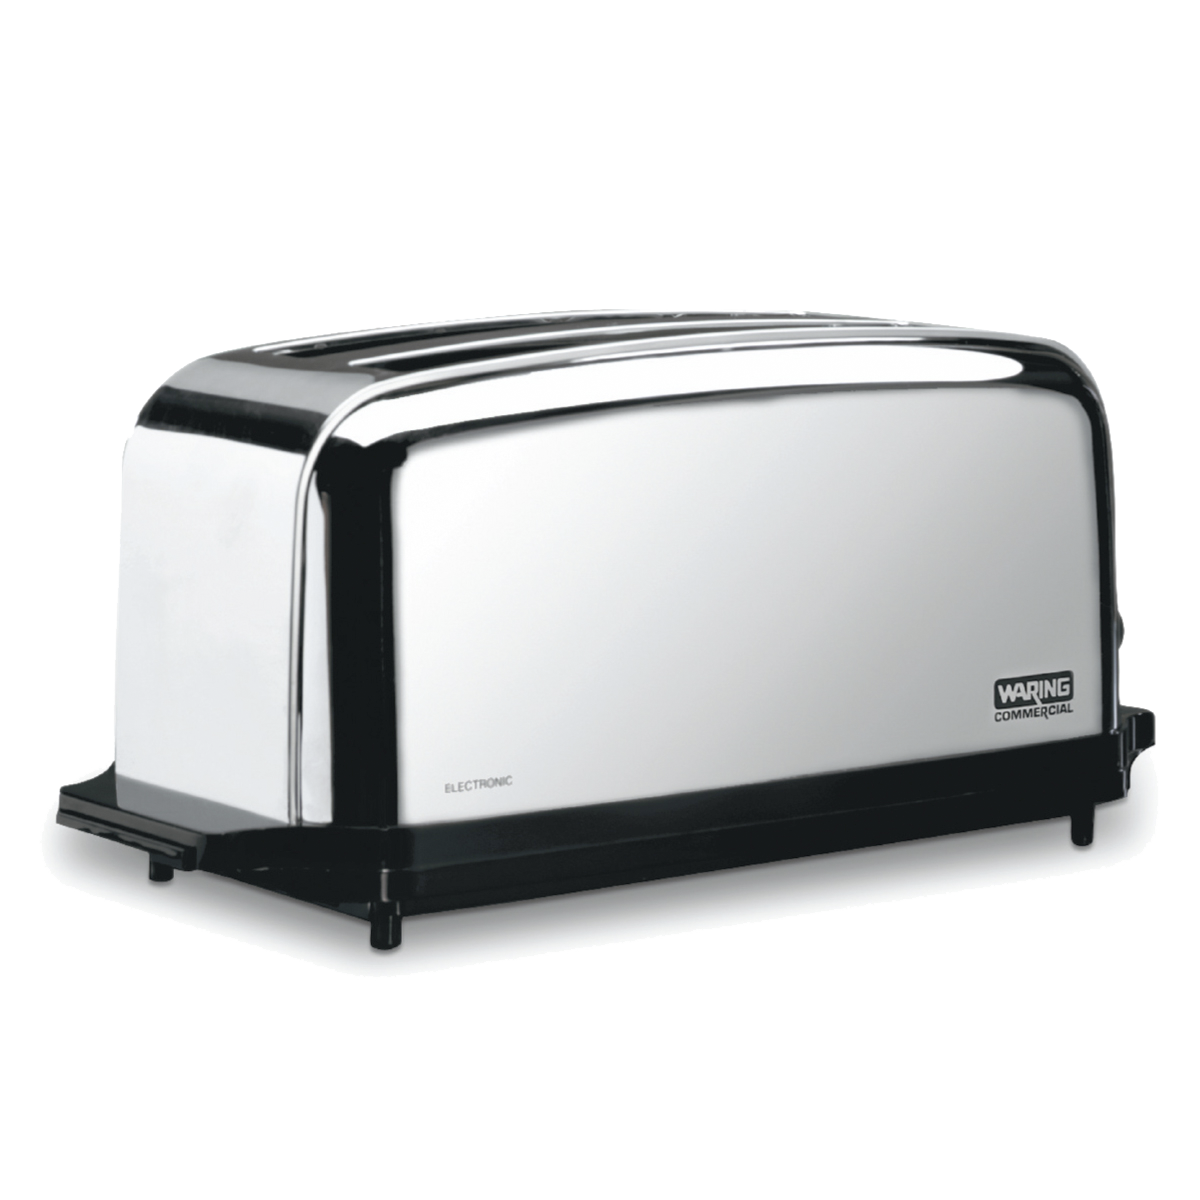 https://www.waringcommercialproducts.com/files/products/wct704-waring-toaster-main.png